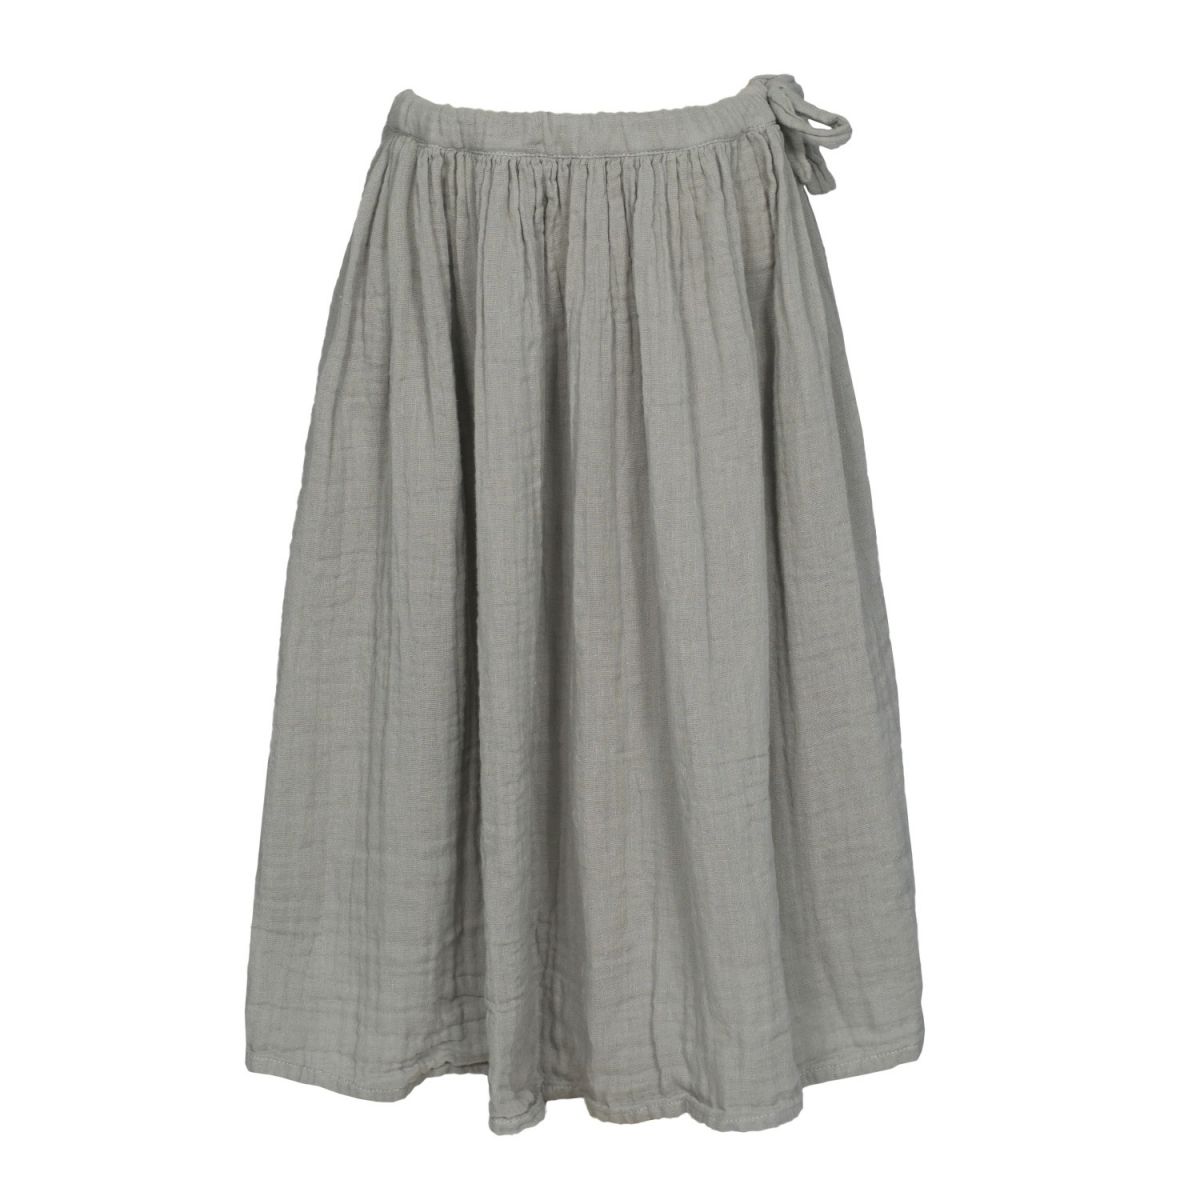 Numero 74 - Skirt for girls Ava long silver grey - Skirts and